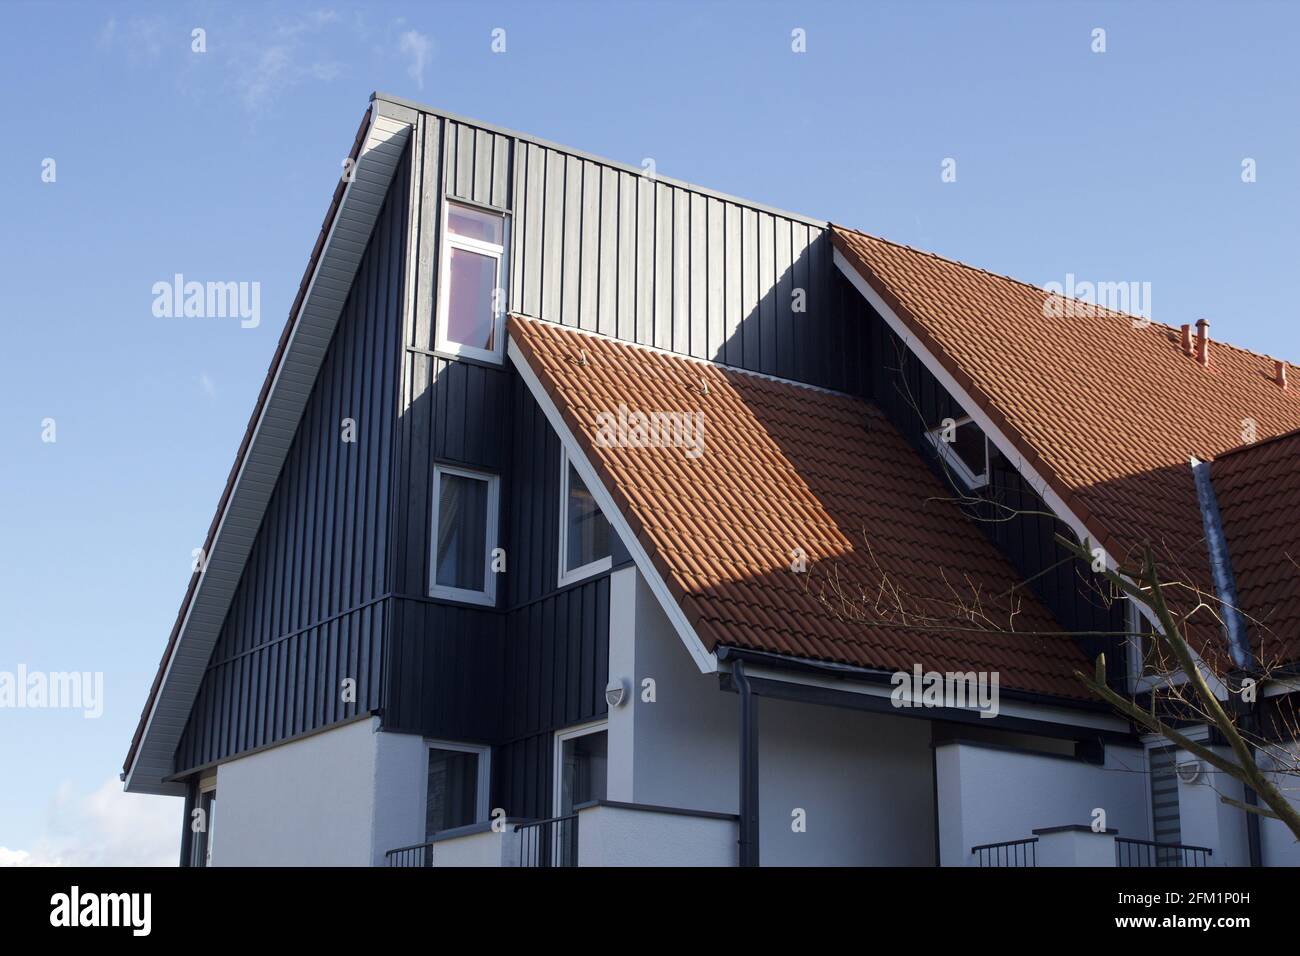 Modern roof house design with red tiles against clear blue sky Stock Photo